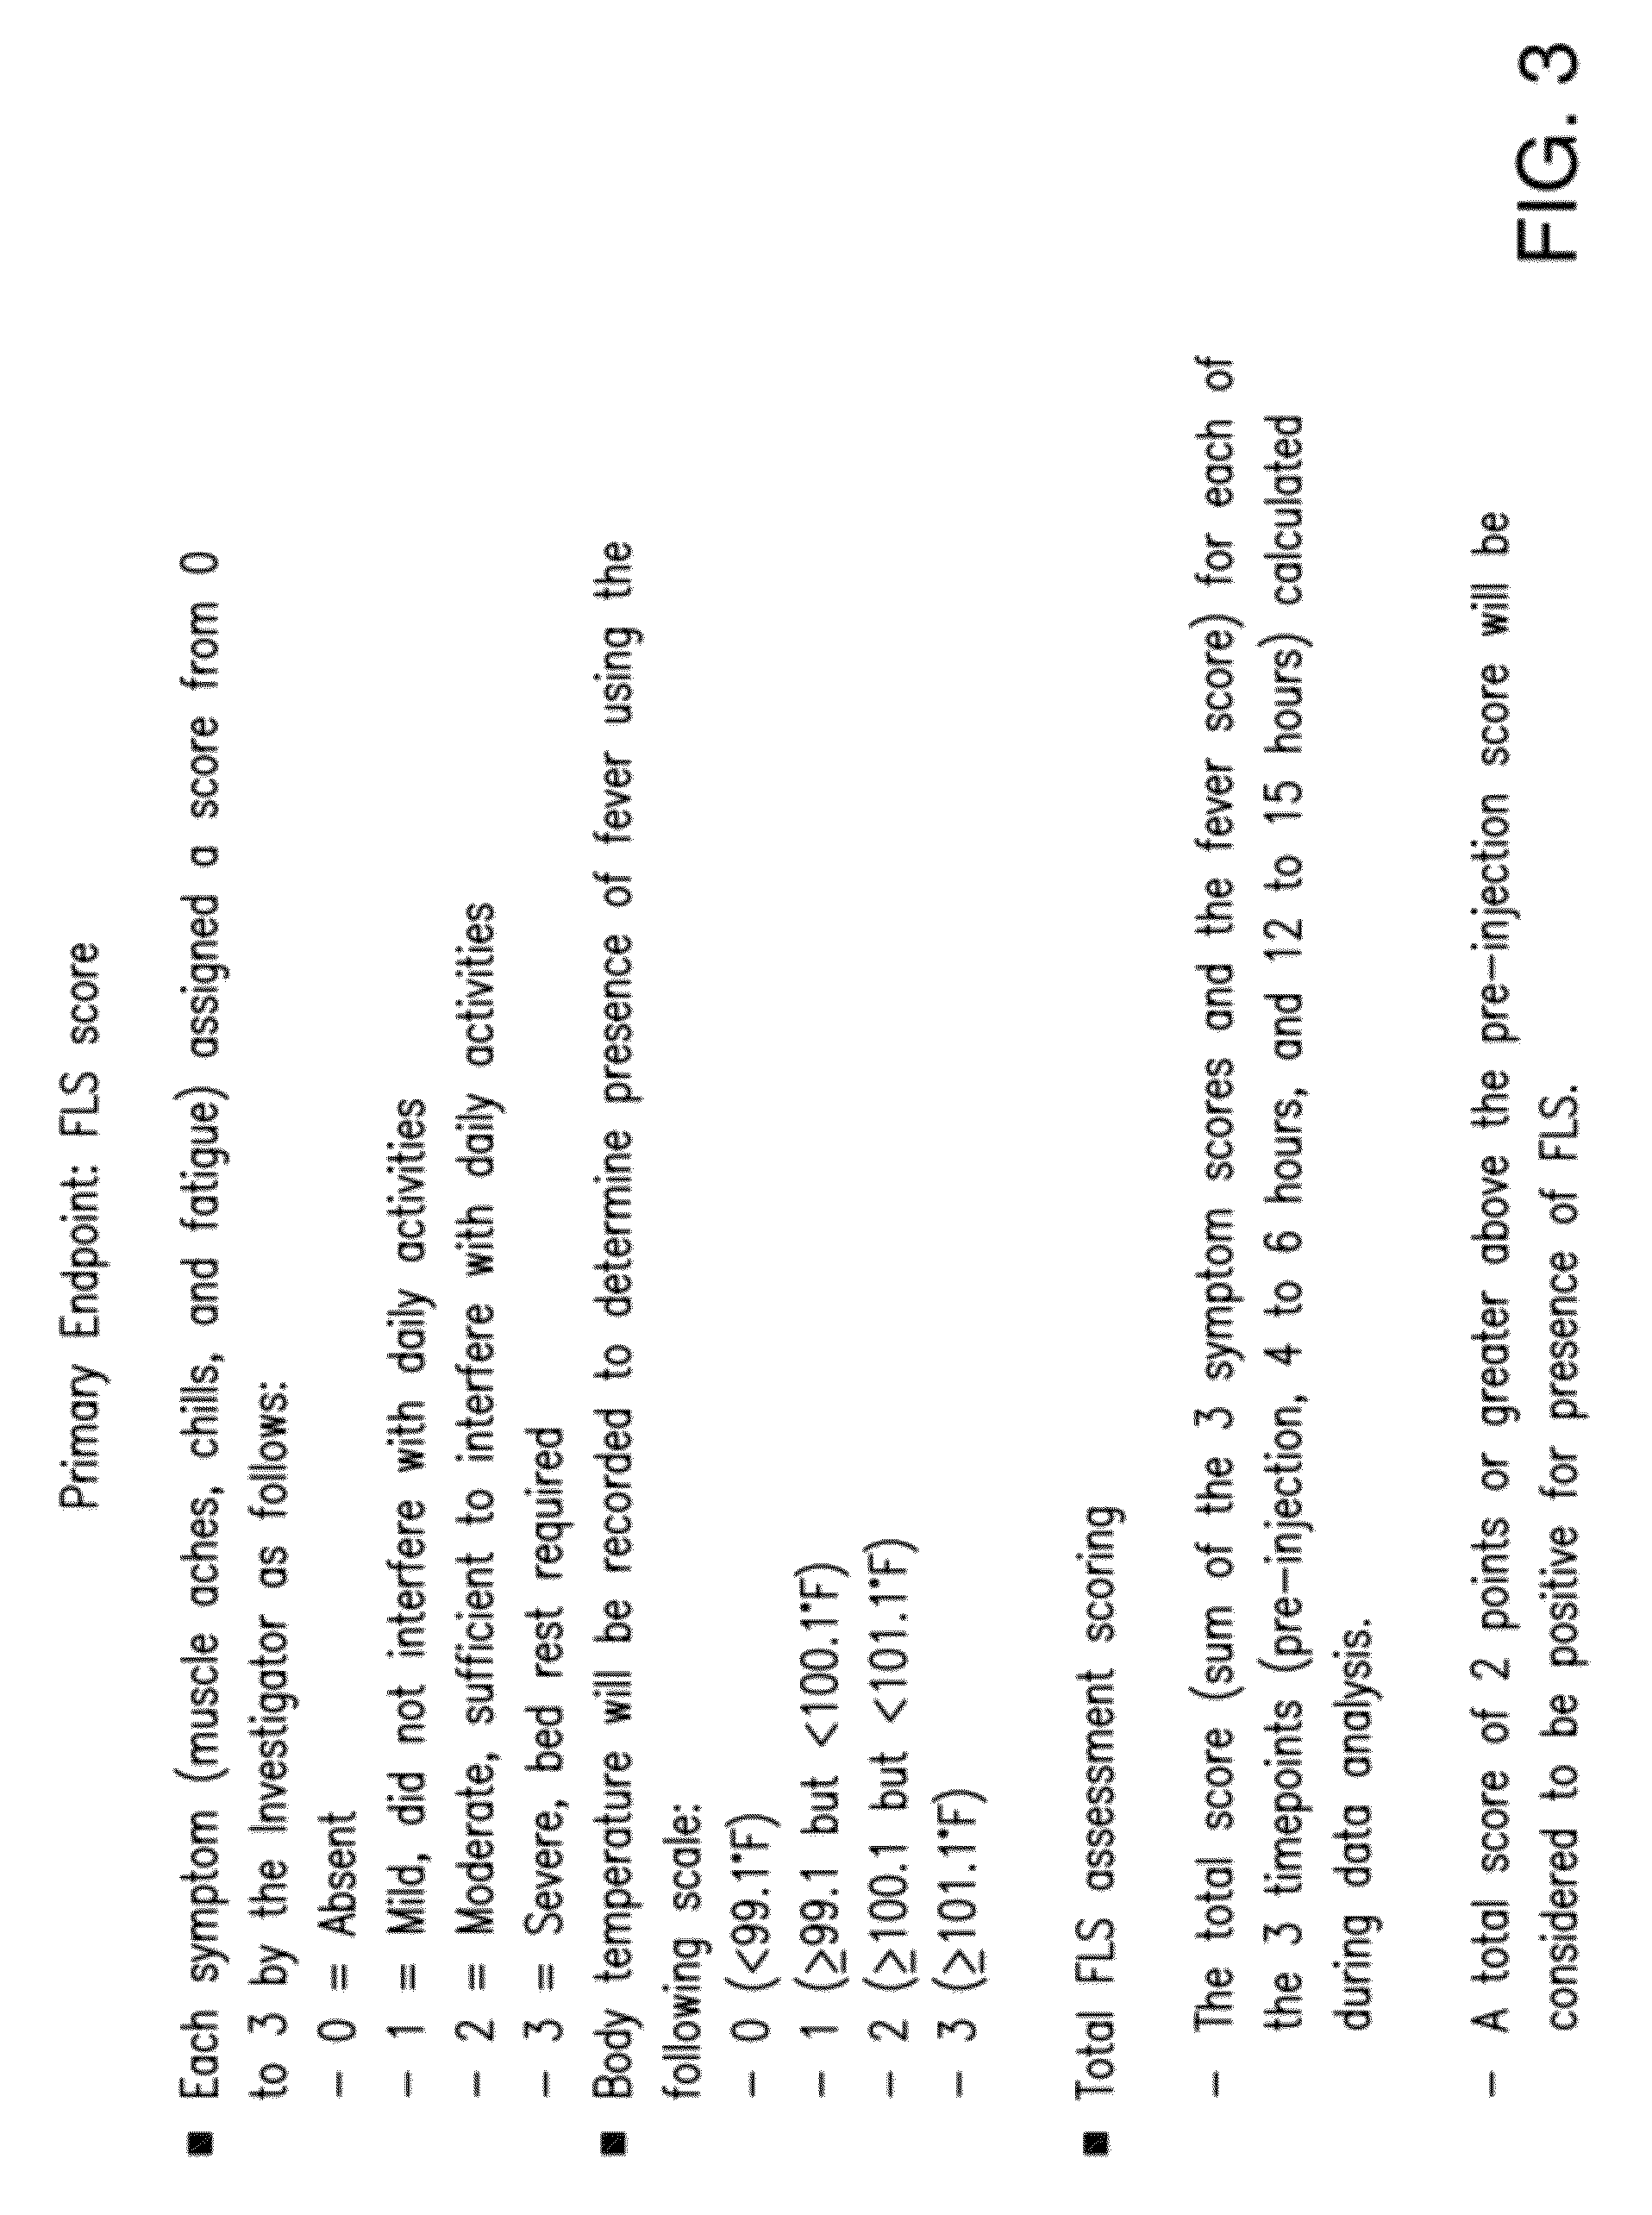 Method for reducing flu-like symptoms associated with intramuscular administration of interferon using a fast titration escalating dosing regimen